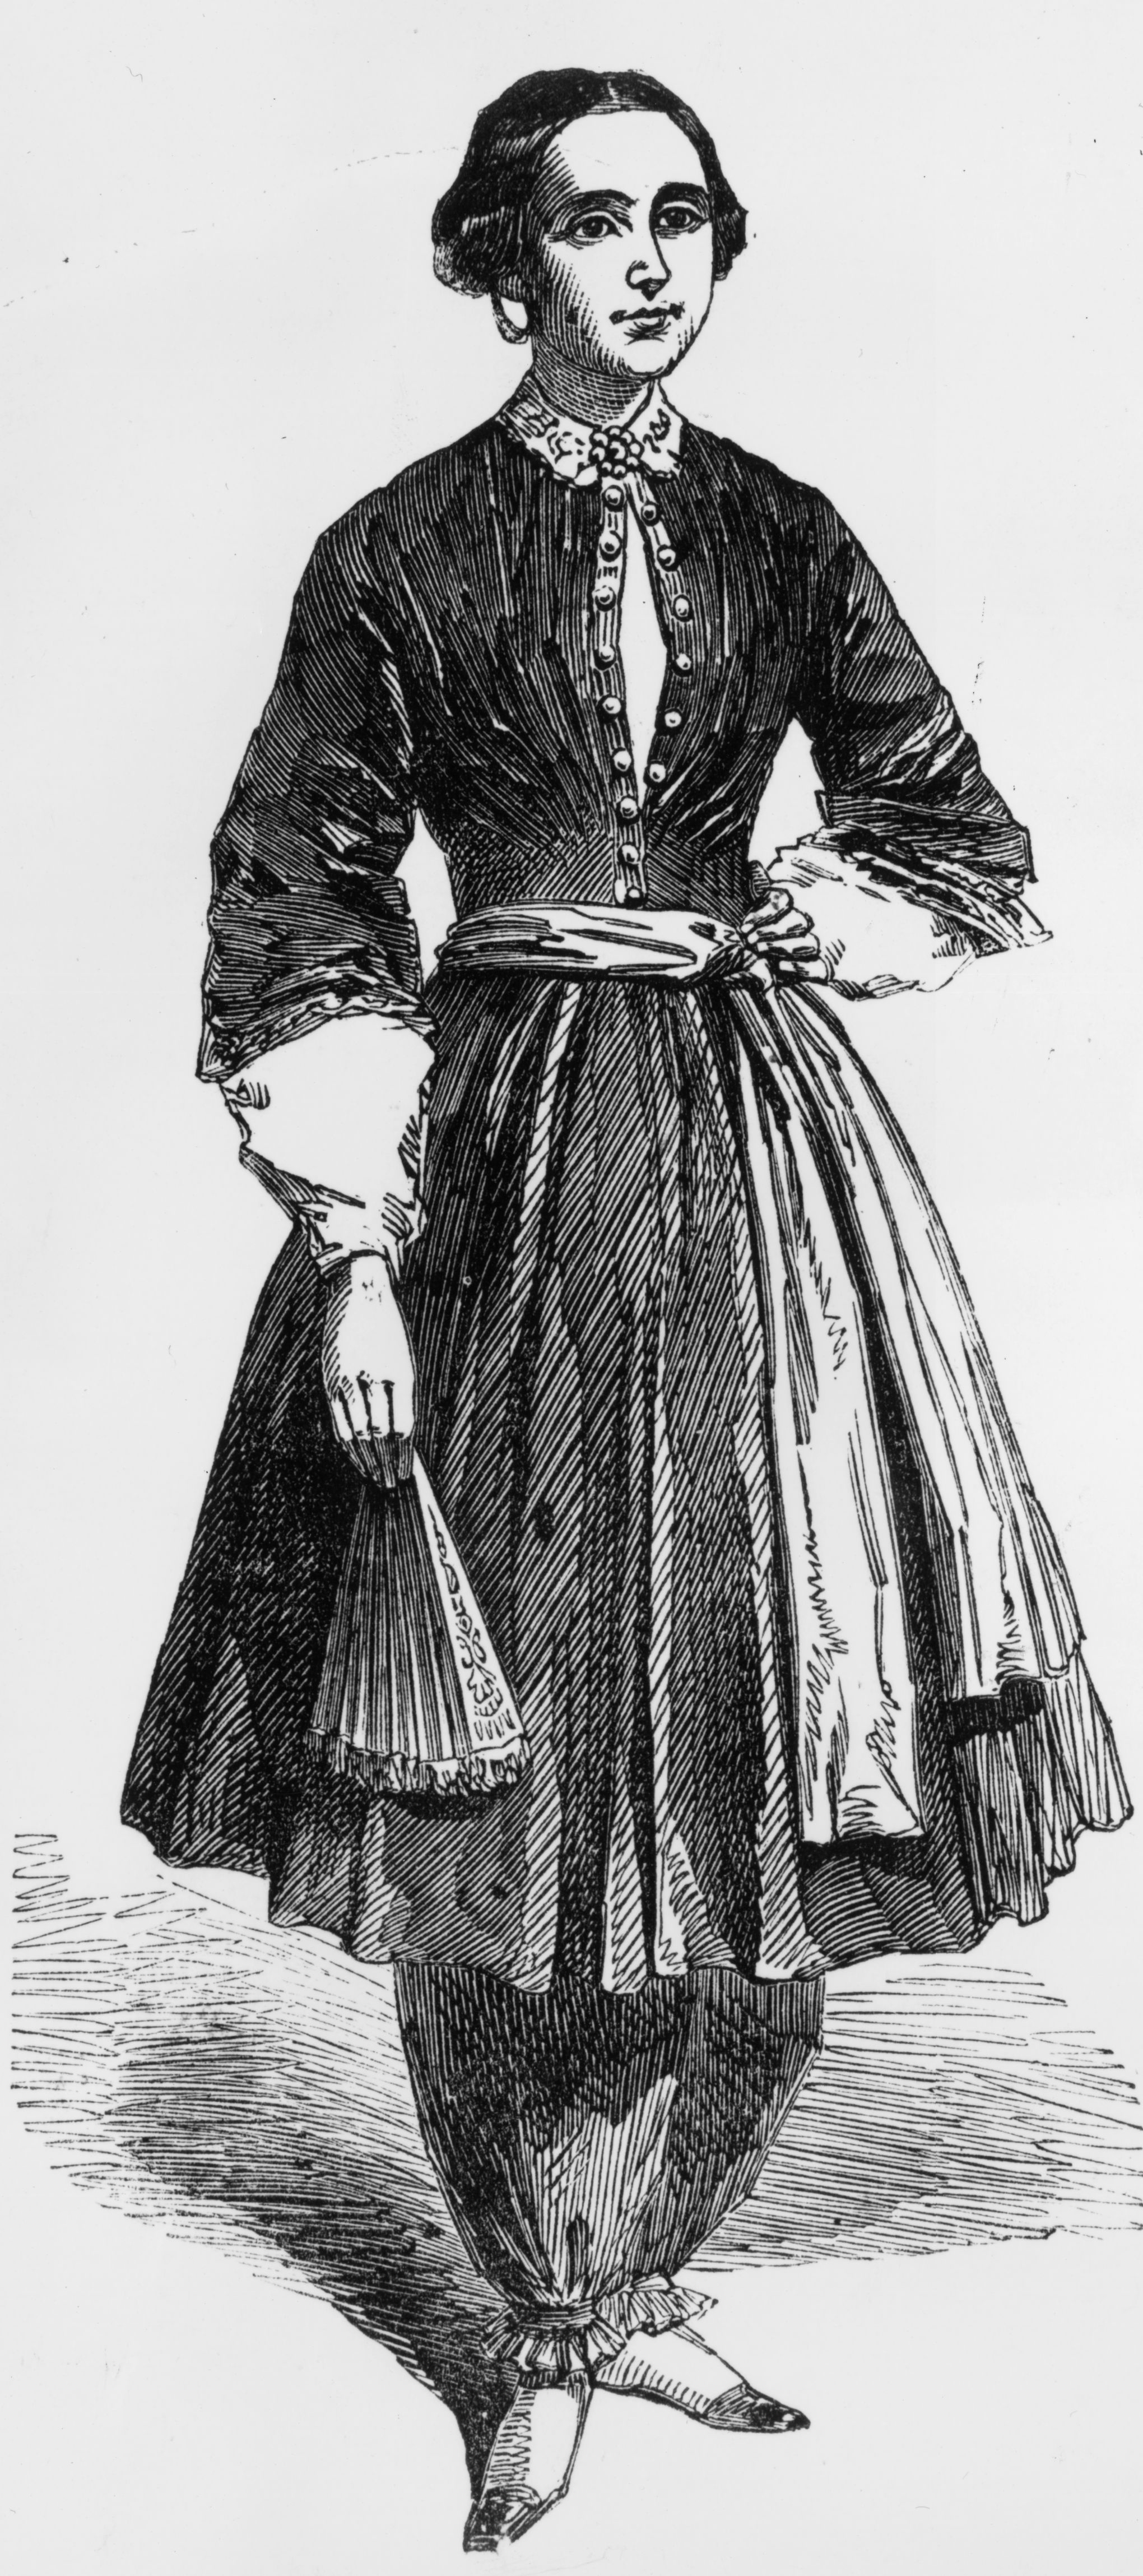 Amelia Bloomer, champion of women's rights and dress reform, wearing the 'trousers' she designed which were called 'bloomers', circa 1855. (Hulton Archive/Getty Images)